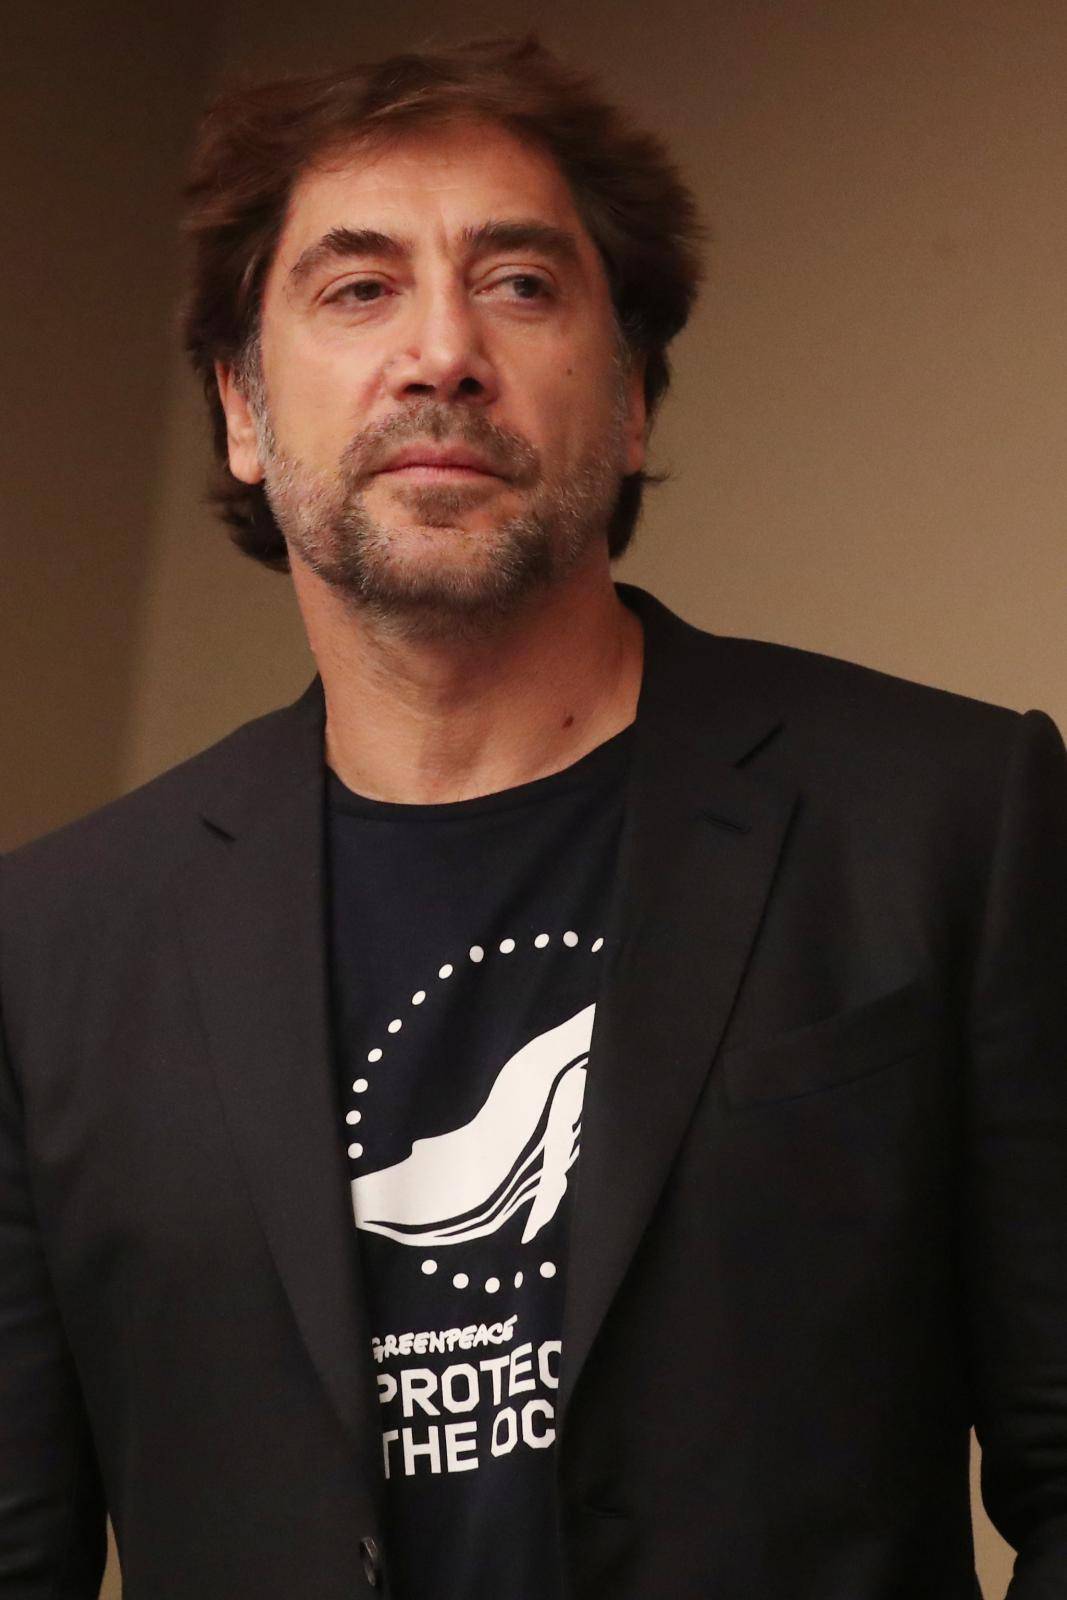 Actor Javier Bardem looks on before speaking about a Global Ocean Treaty to protect the oceans with the Greenpeace and High Seas Alliance at the United Nations headquarters in New York